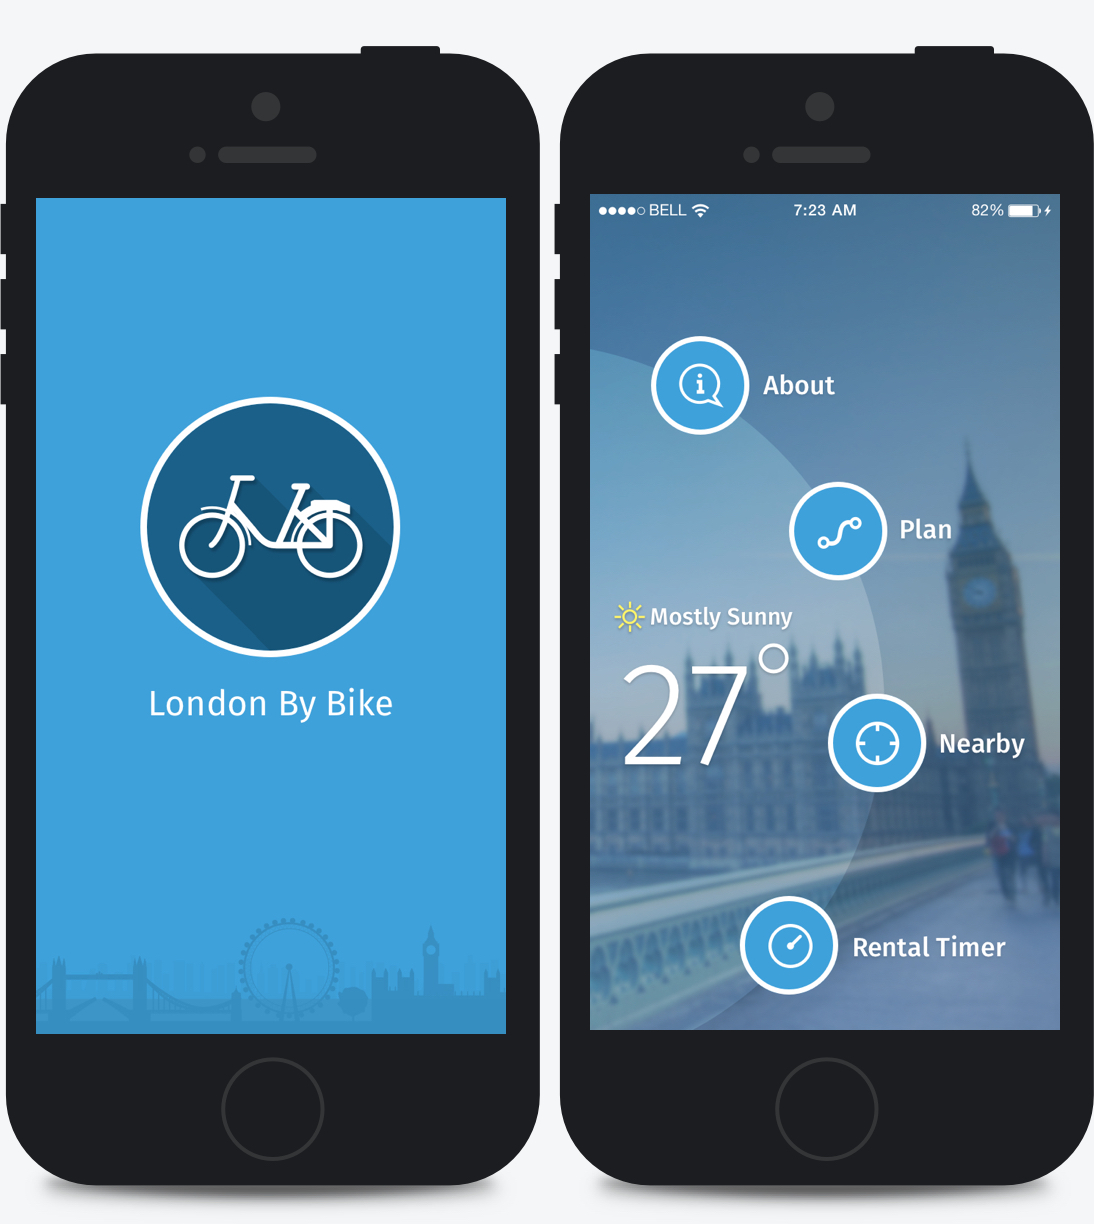 The Barclays Bikes Application loading and dashboard home screen.